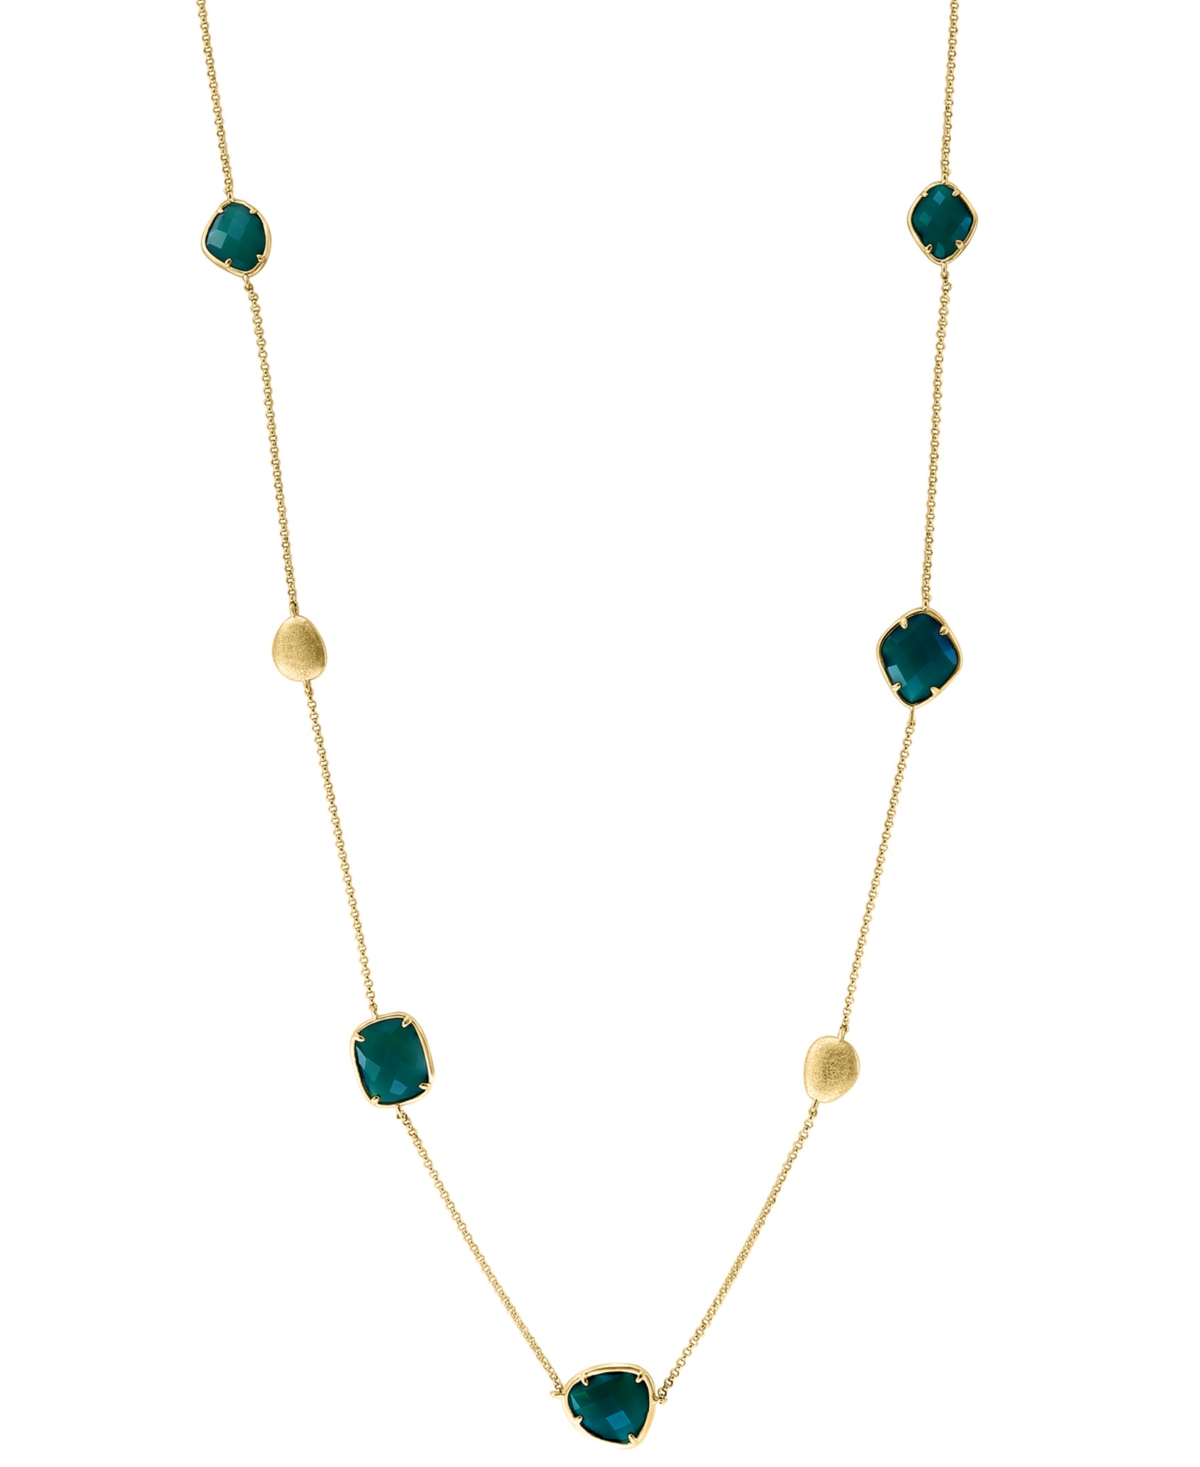 Effy Collection Effy Green Onyx & Textured Bead 18" Statement Necklace In 14k Gold